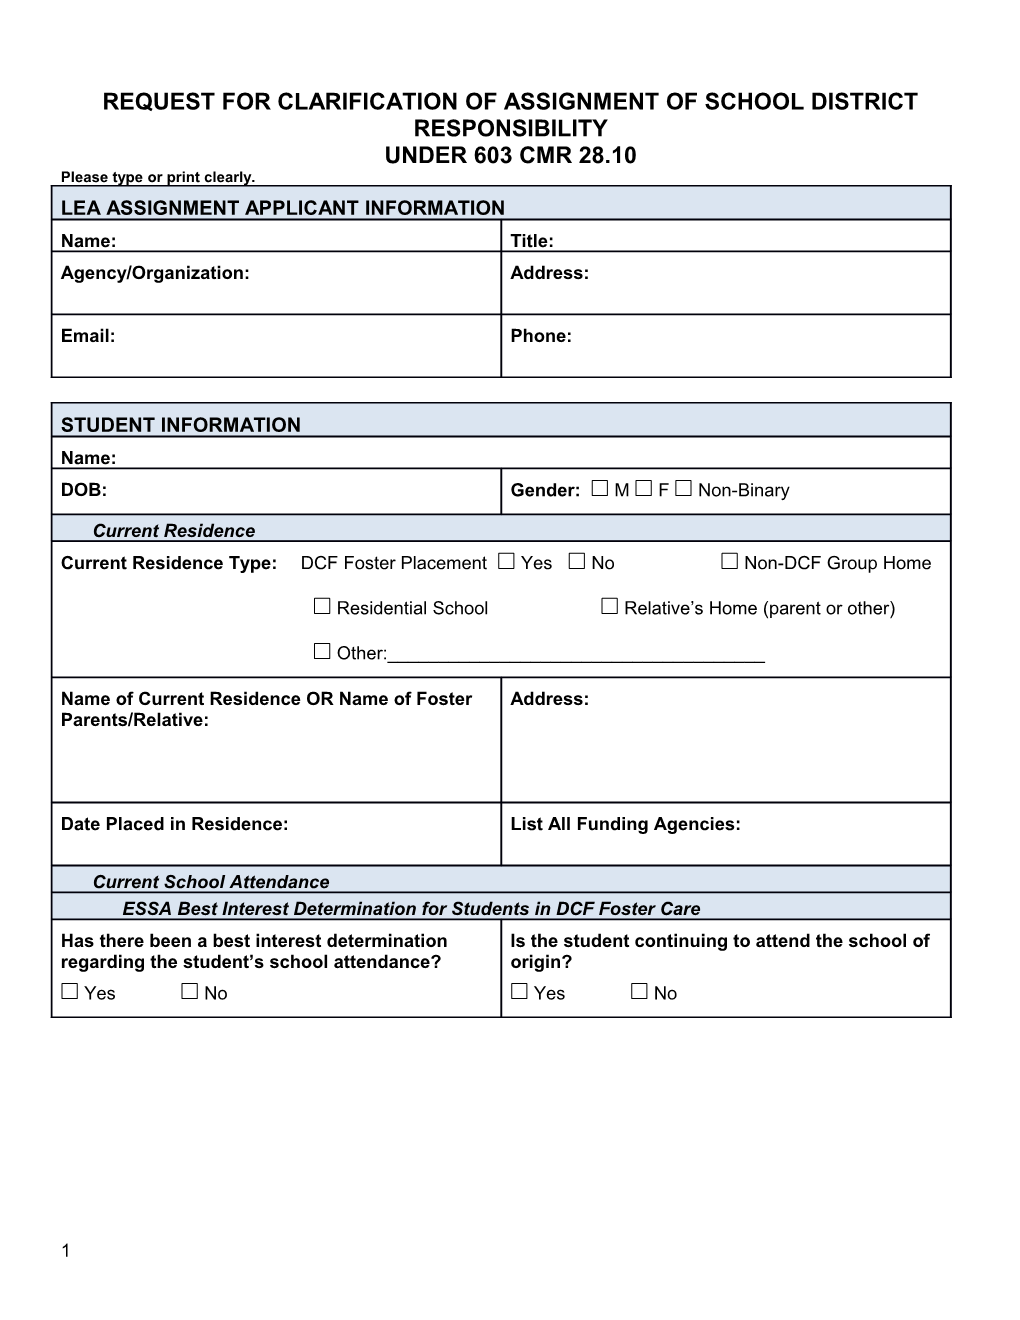 Form 28M2, Revised: Request for Clarification of Assignment of School District Responsibility